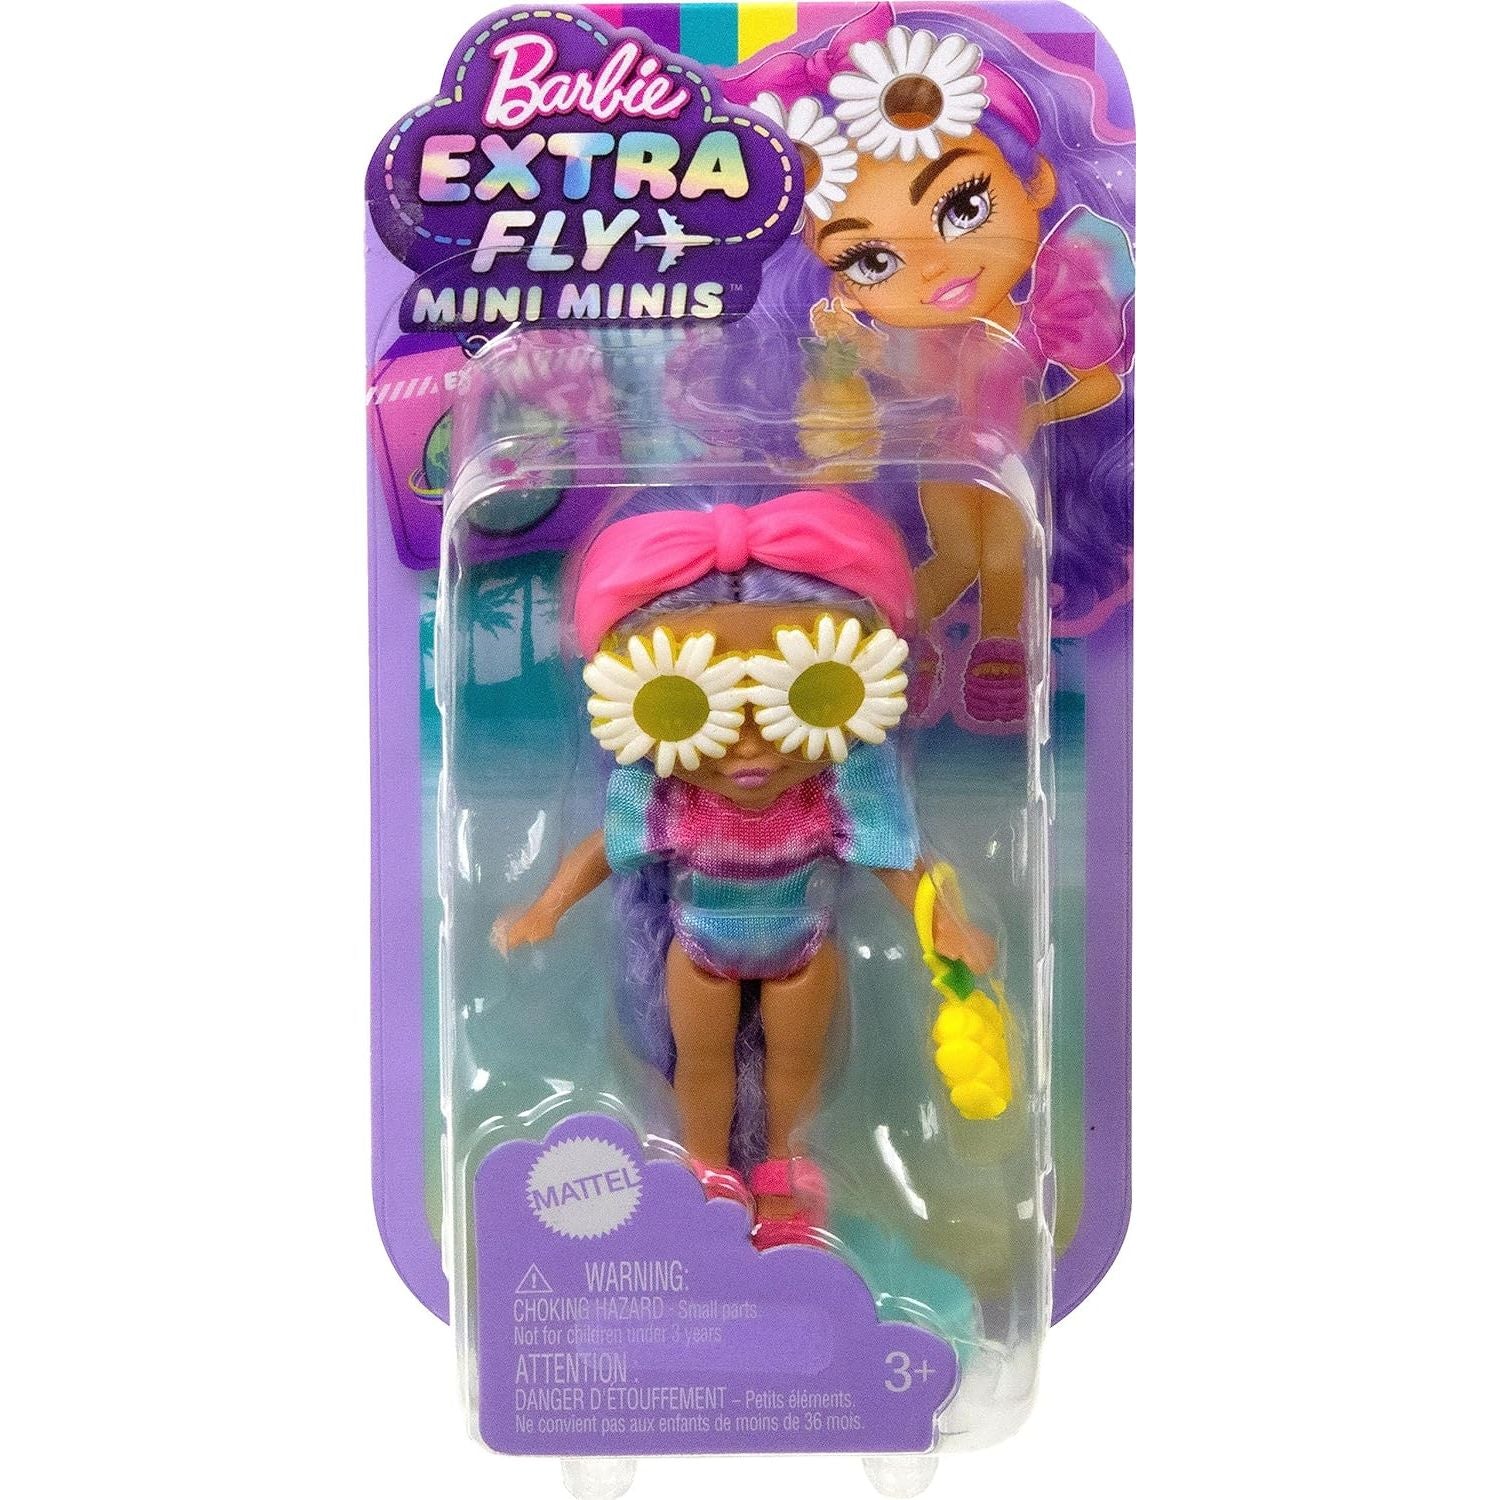 Barbie Extra Mini Minis Travel Doll with Beach Fashion, Tie-Dye Swimsuit and Tropical Accessories, Barbie Extra Fly Small Doll